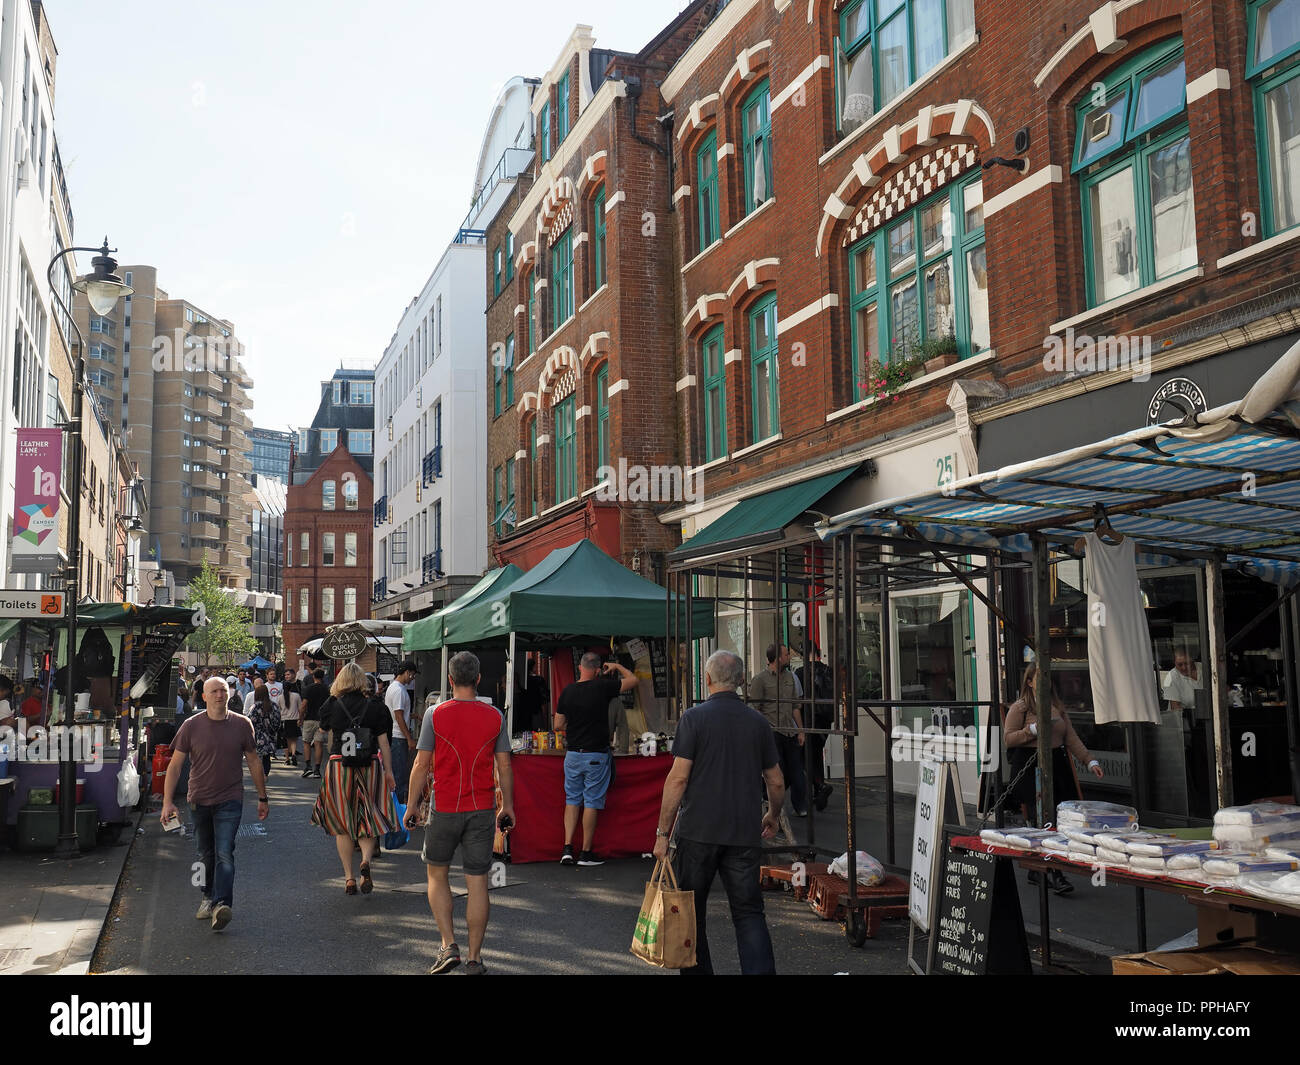 View along the street market and food stalls in Leather Lane London Stock Photo